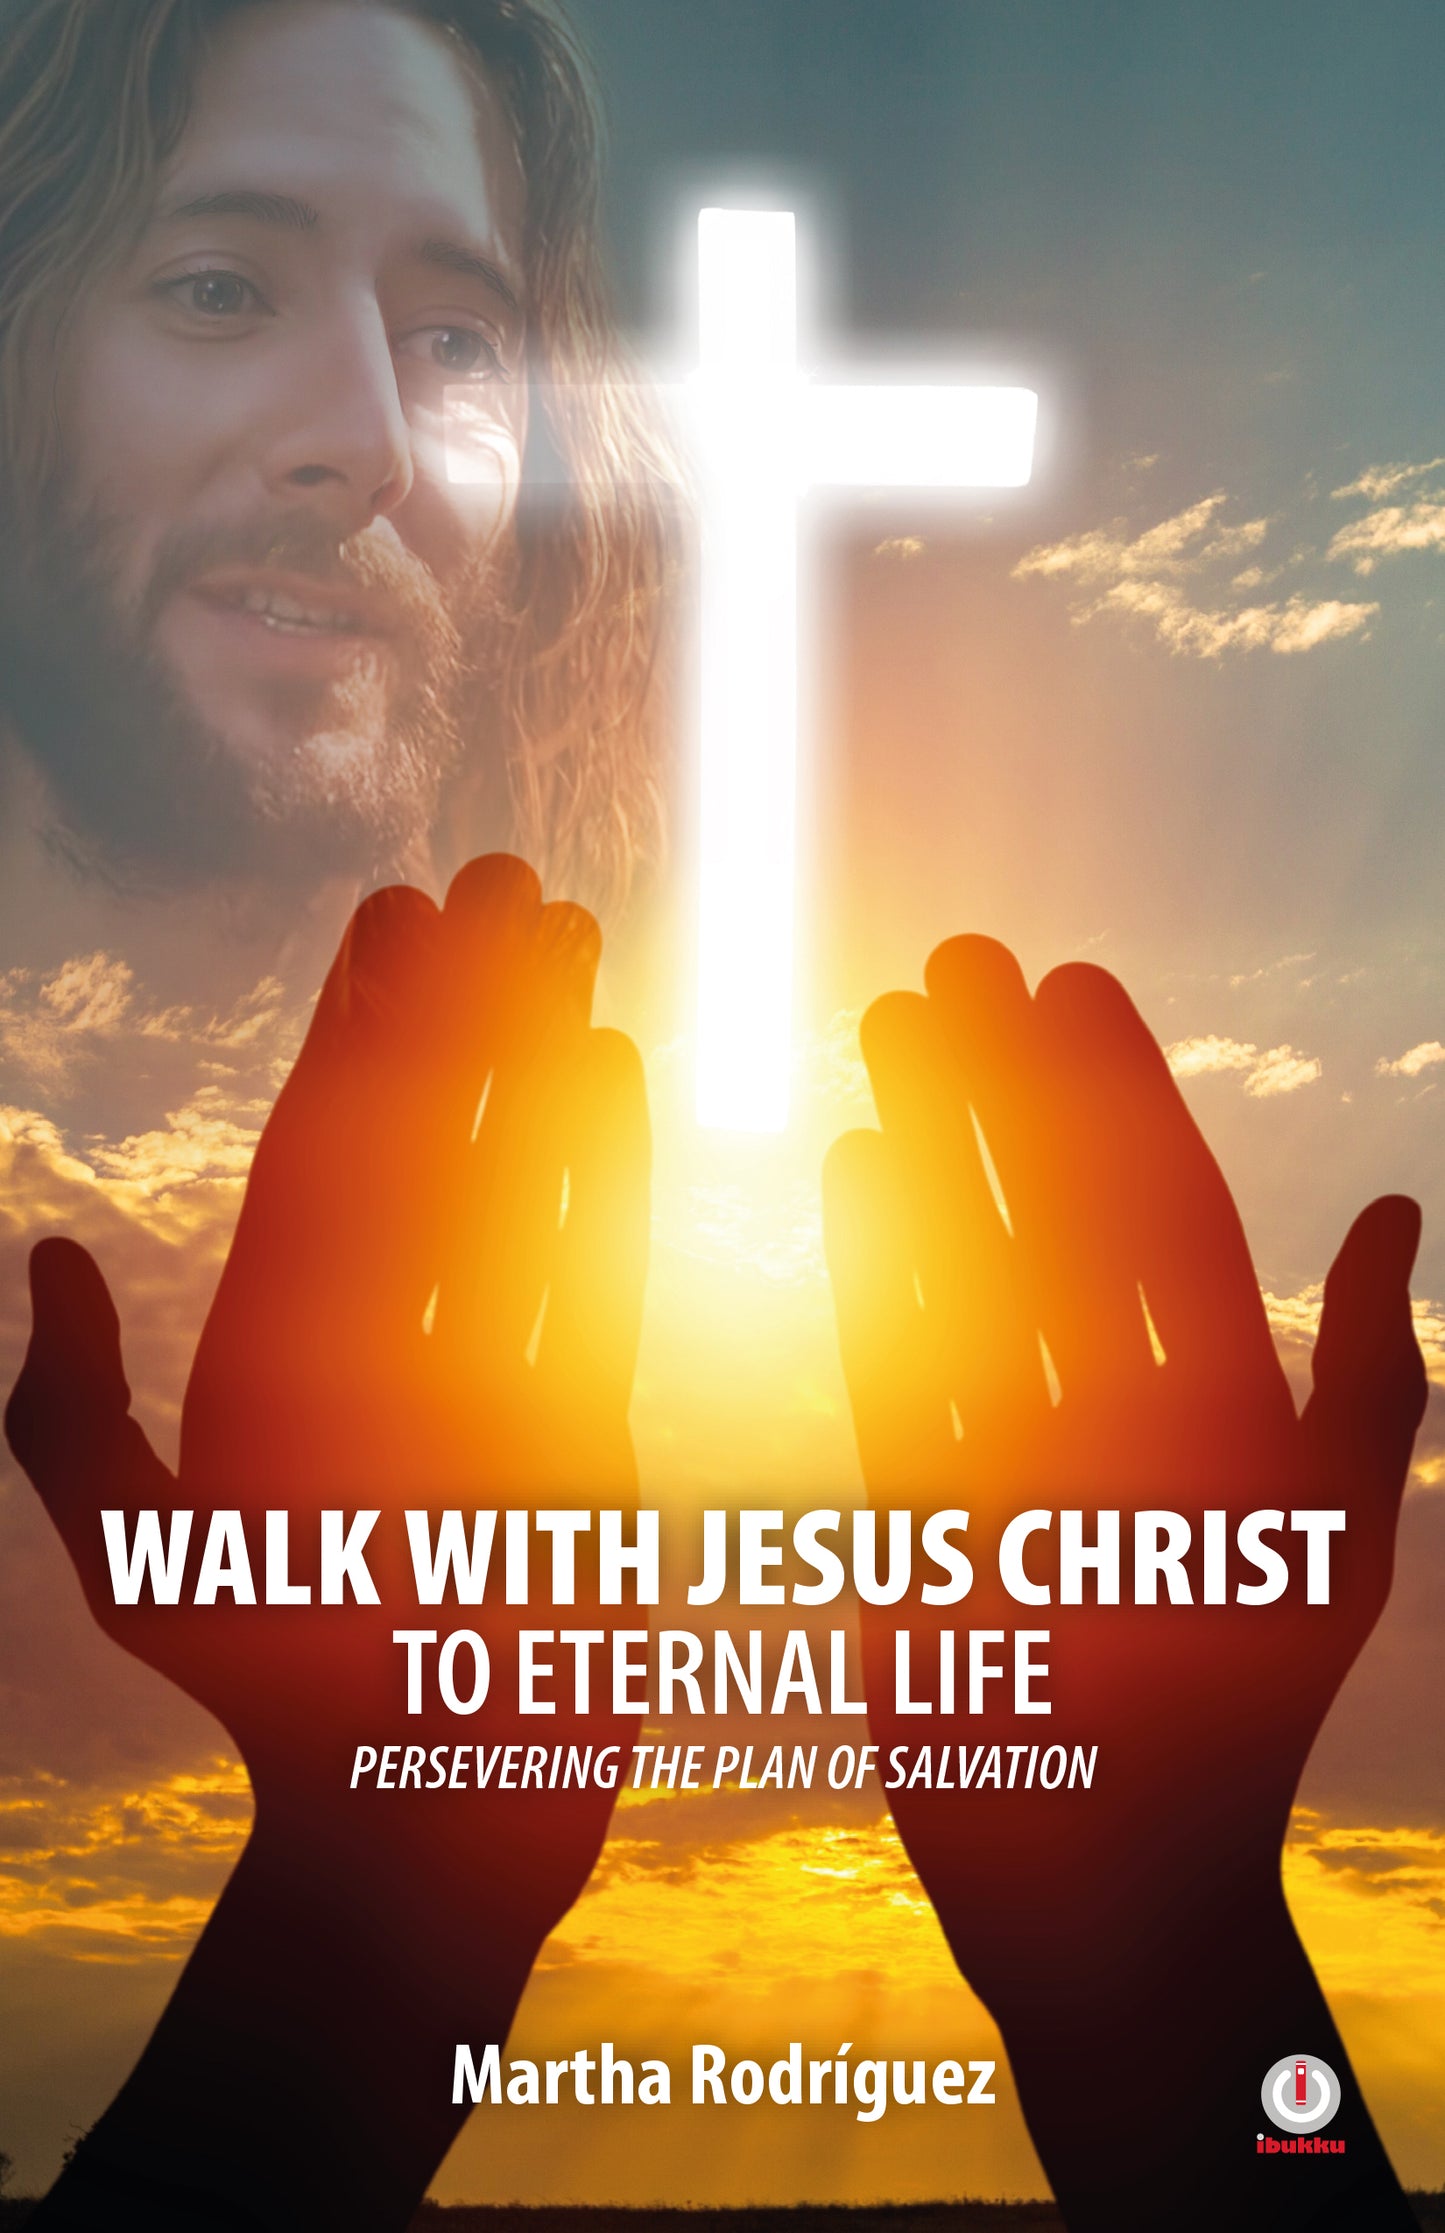 Walk With Jesus Christ To Eternal Life: Persevering The Plan Of Salvation